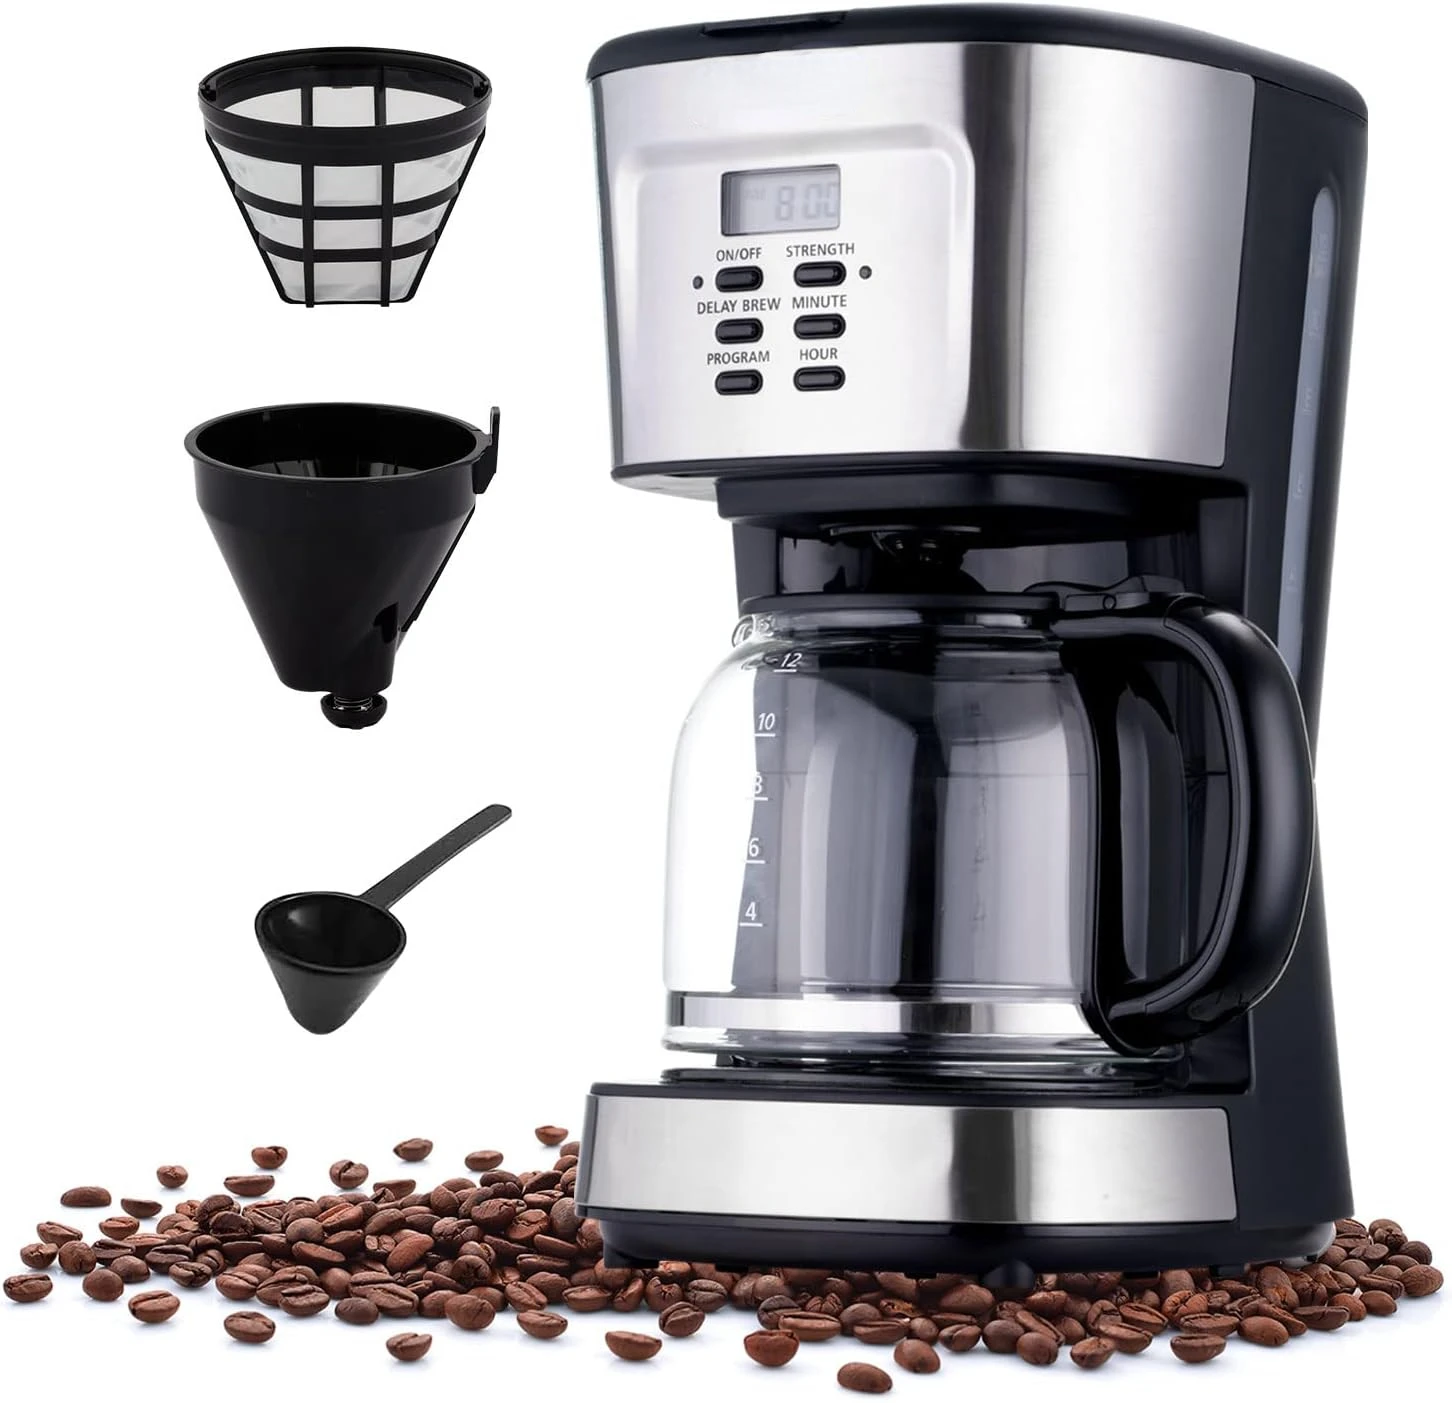 

Cup Thermal Coffee Maker, Programmable Small Coffee Maker with Glass Carafe and Filter, Dirp Coffee Maker Coffee Pot Machine, Ke